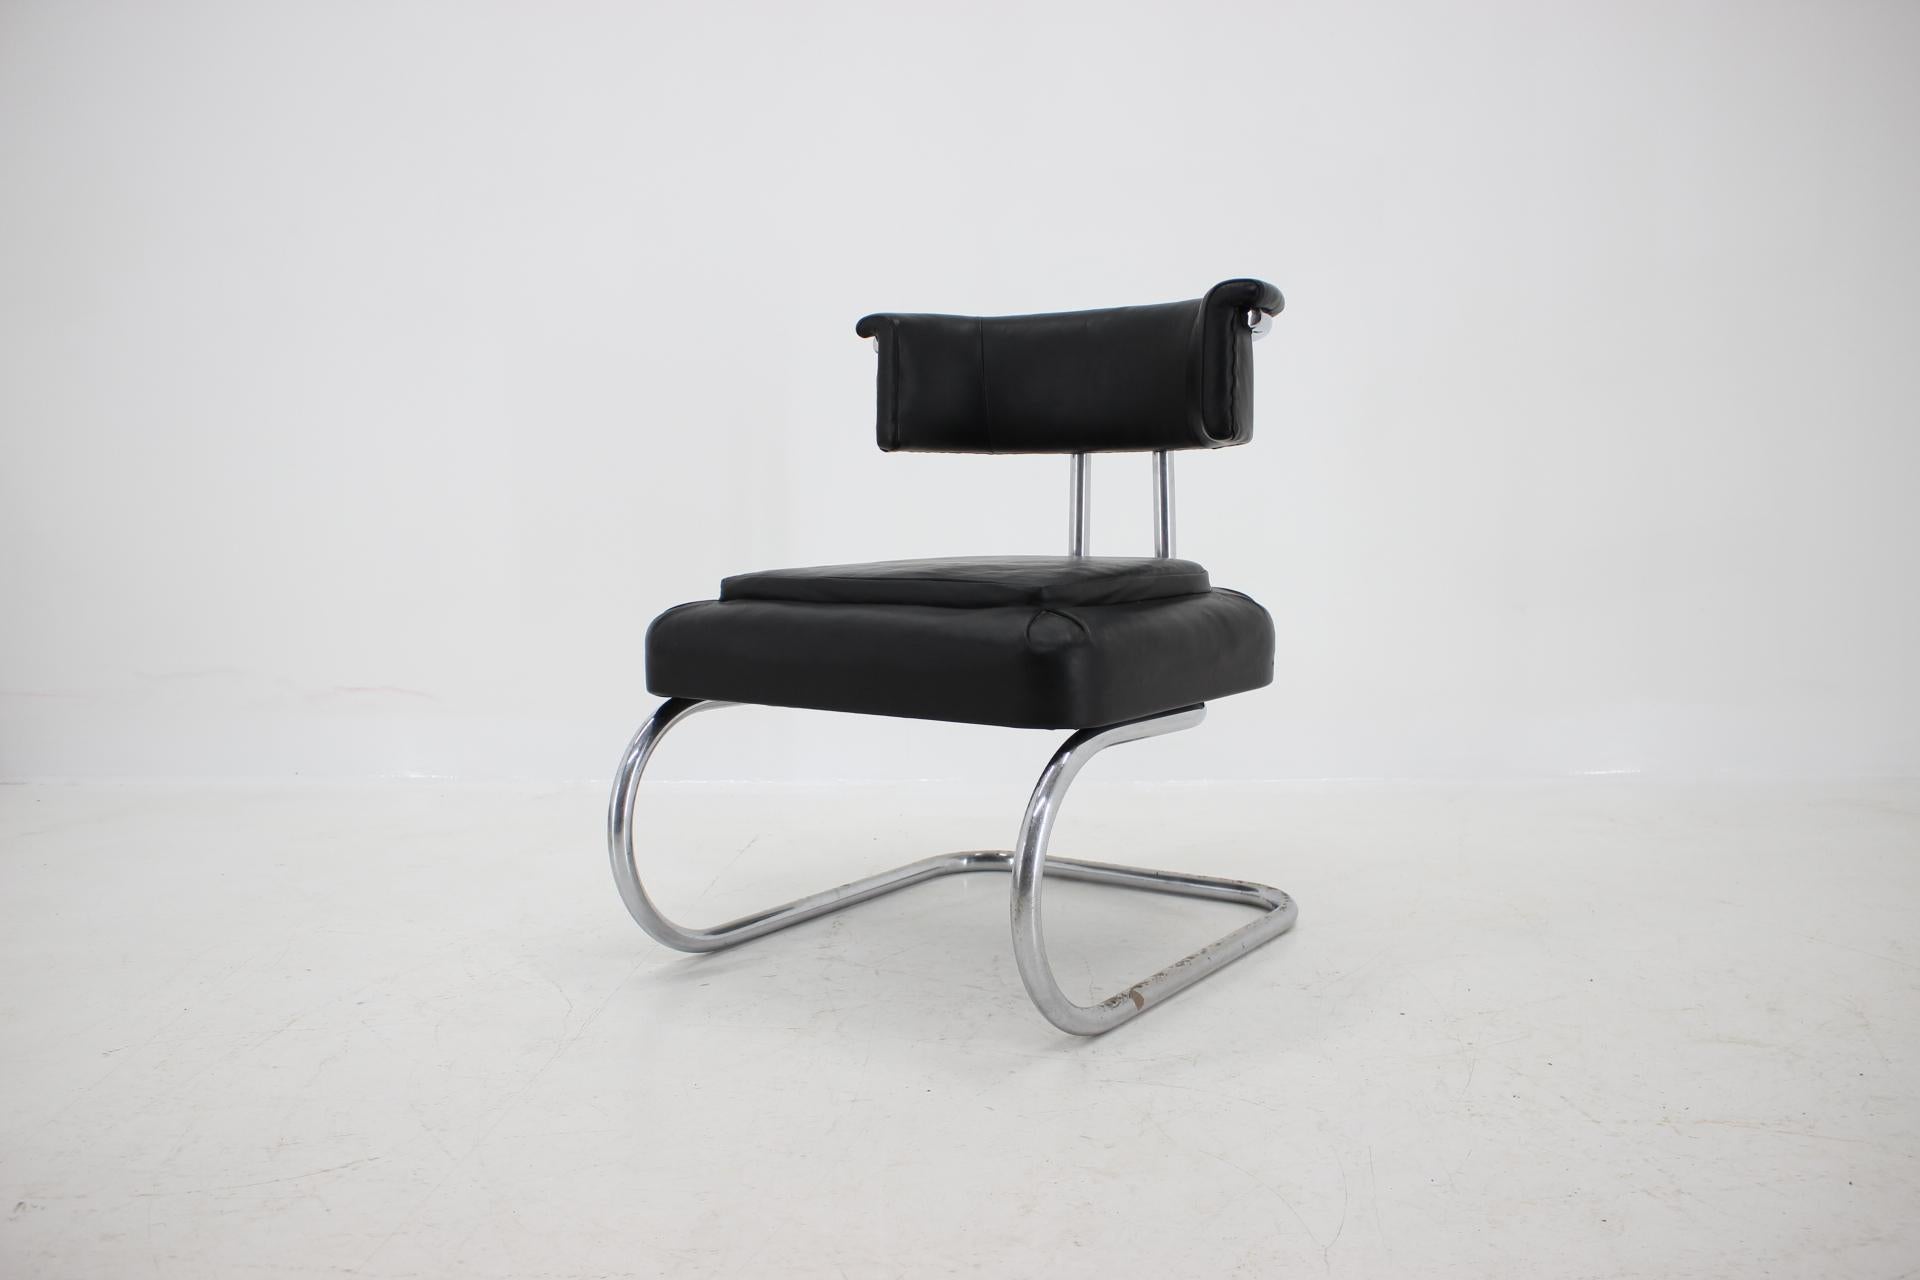 - Czechoslovakia, 1930s
- Manufacturer: MÜCKE MELDER, model fn 28
- Publicated in catalogues and books (2000 chrome chairs by Otakar Mácel)
- Good original condition with patina
- New upholstery with high-quality black leather.